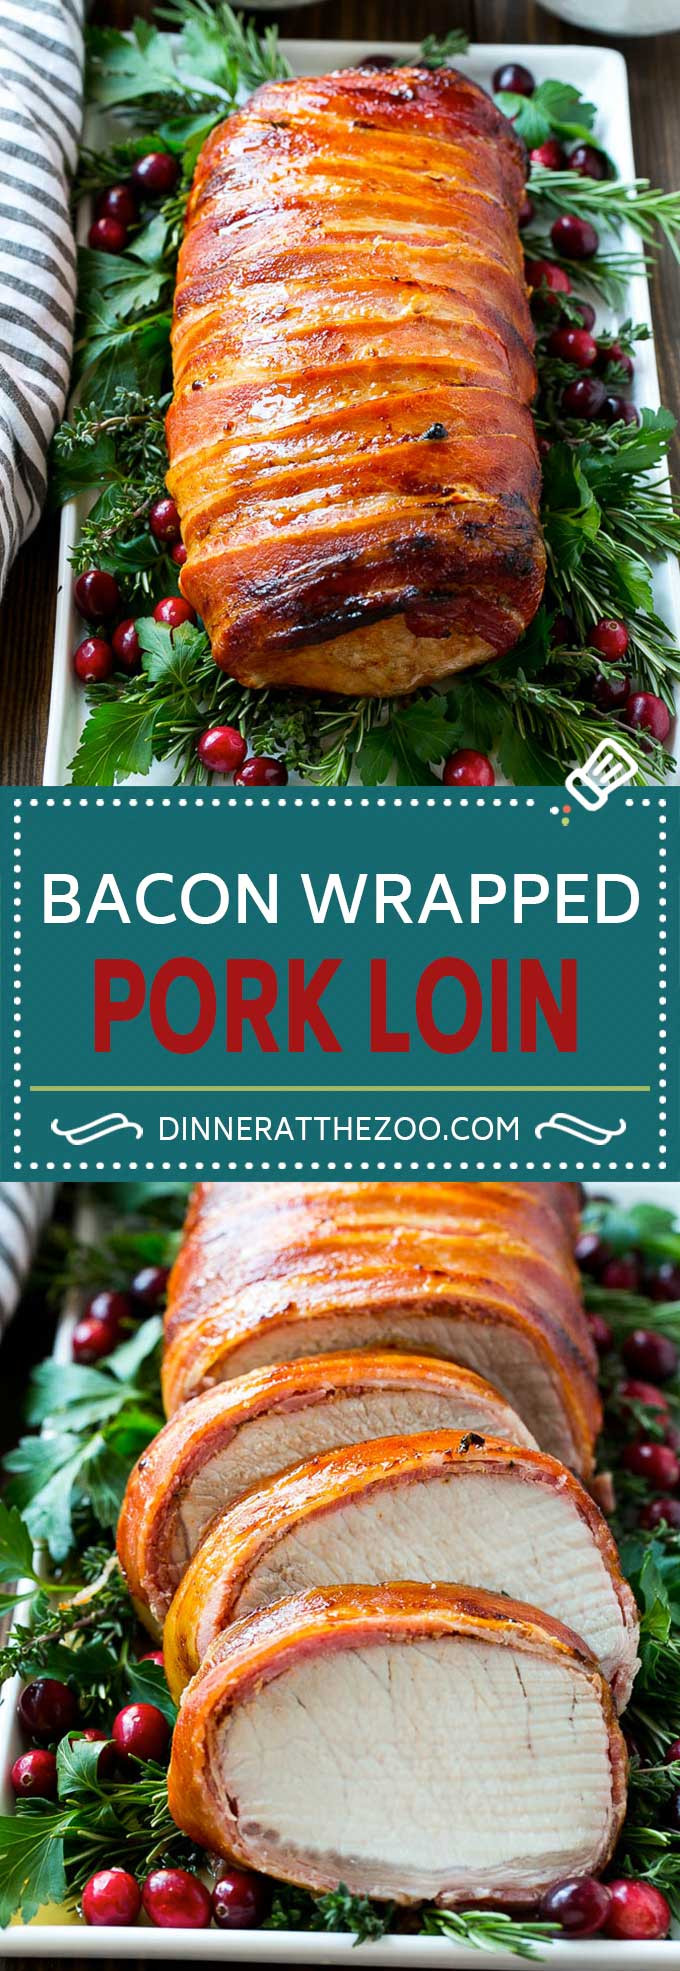 Grilled Pork Loin Roast Recipes
 Bacon Wrapped Pork Loin Dinner at the Zoo